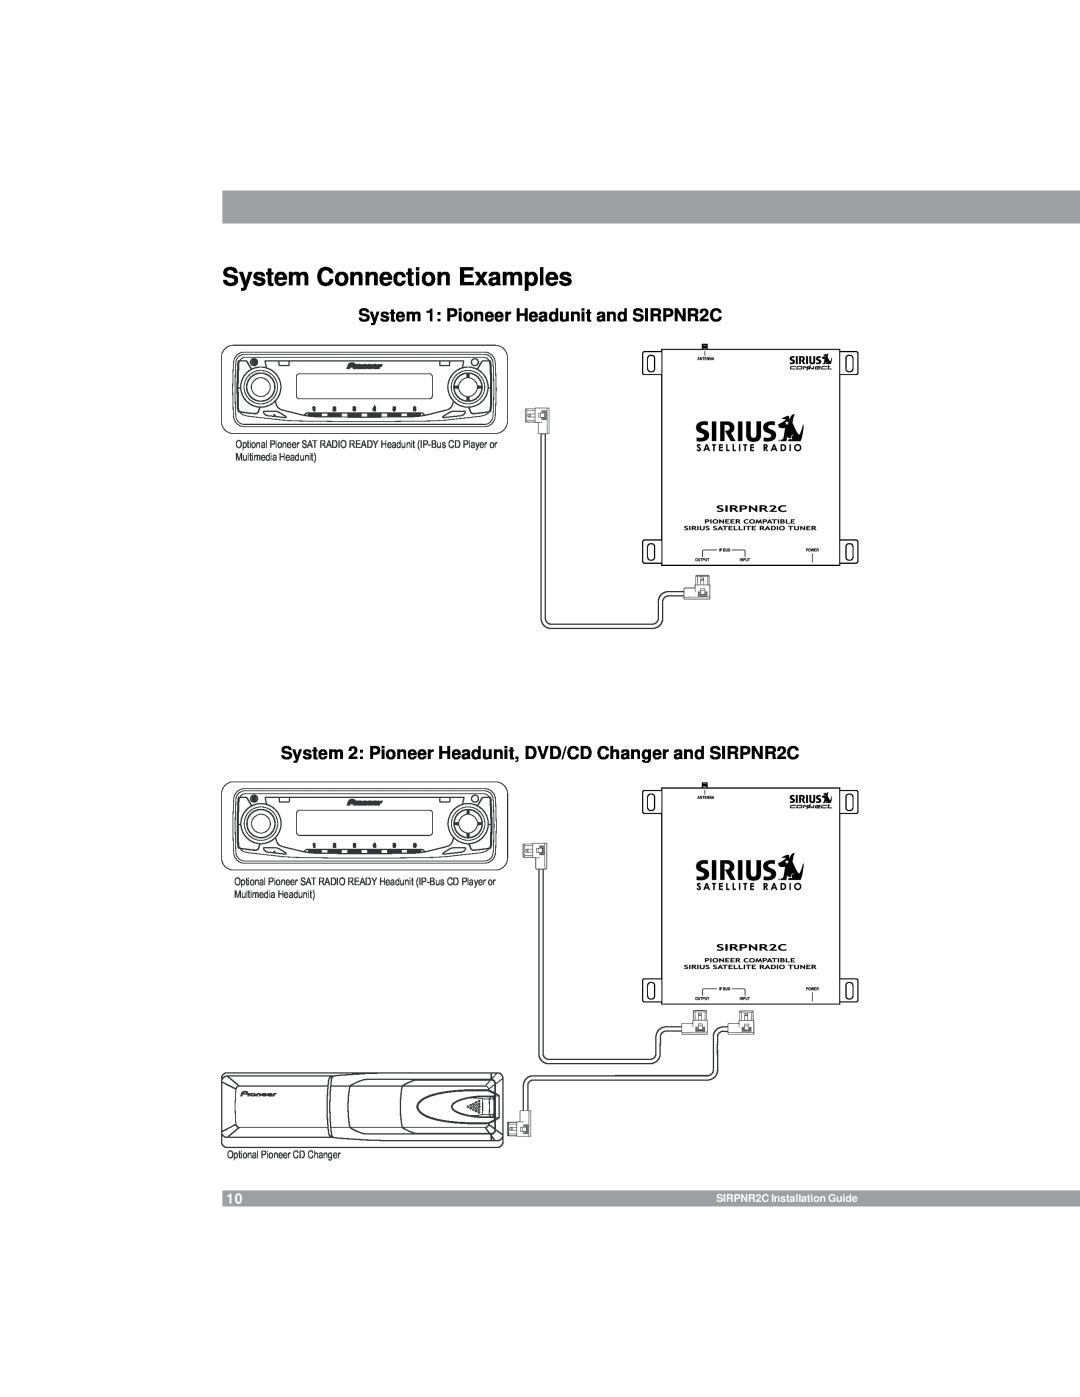 Sirius Satellite Radio manual System Connection Examples, System 1 Pioneer Headunit and SIRPNR2C, Multimedia Headunit 